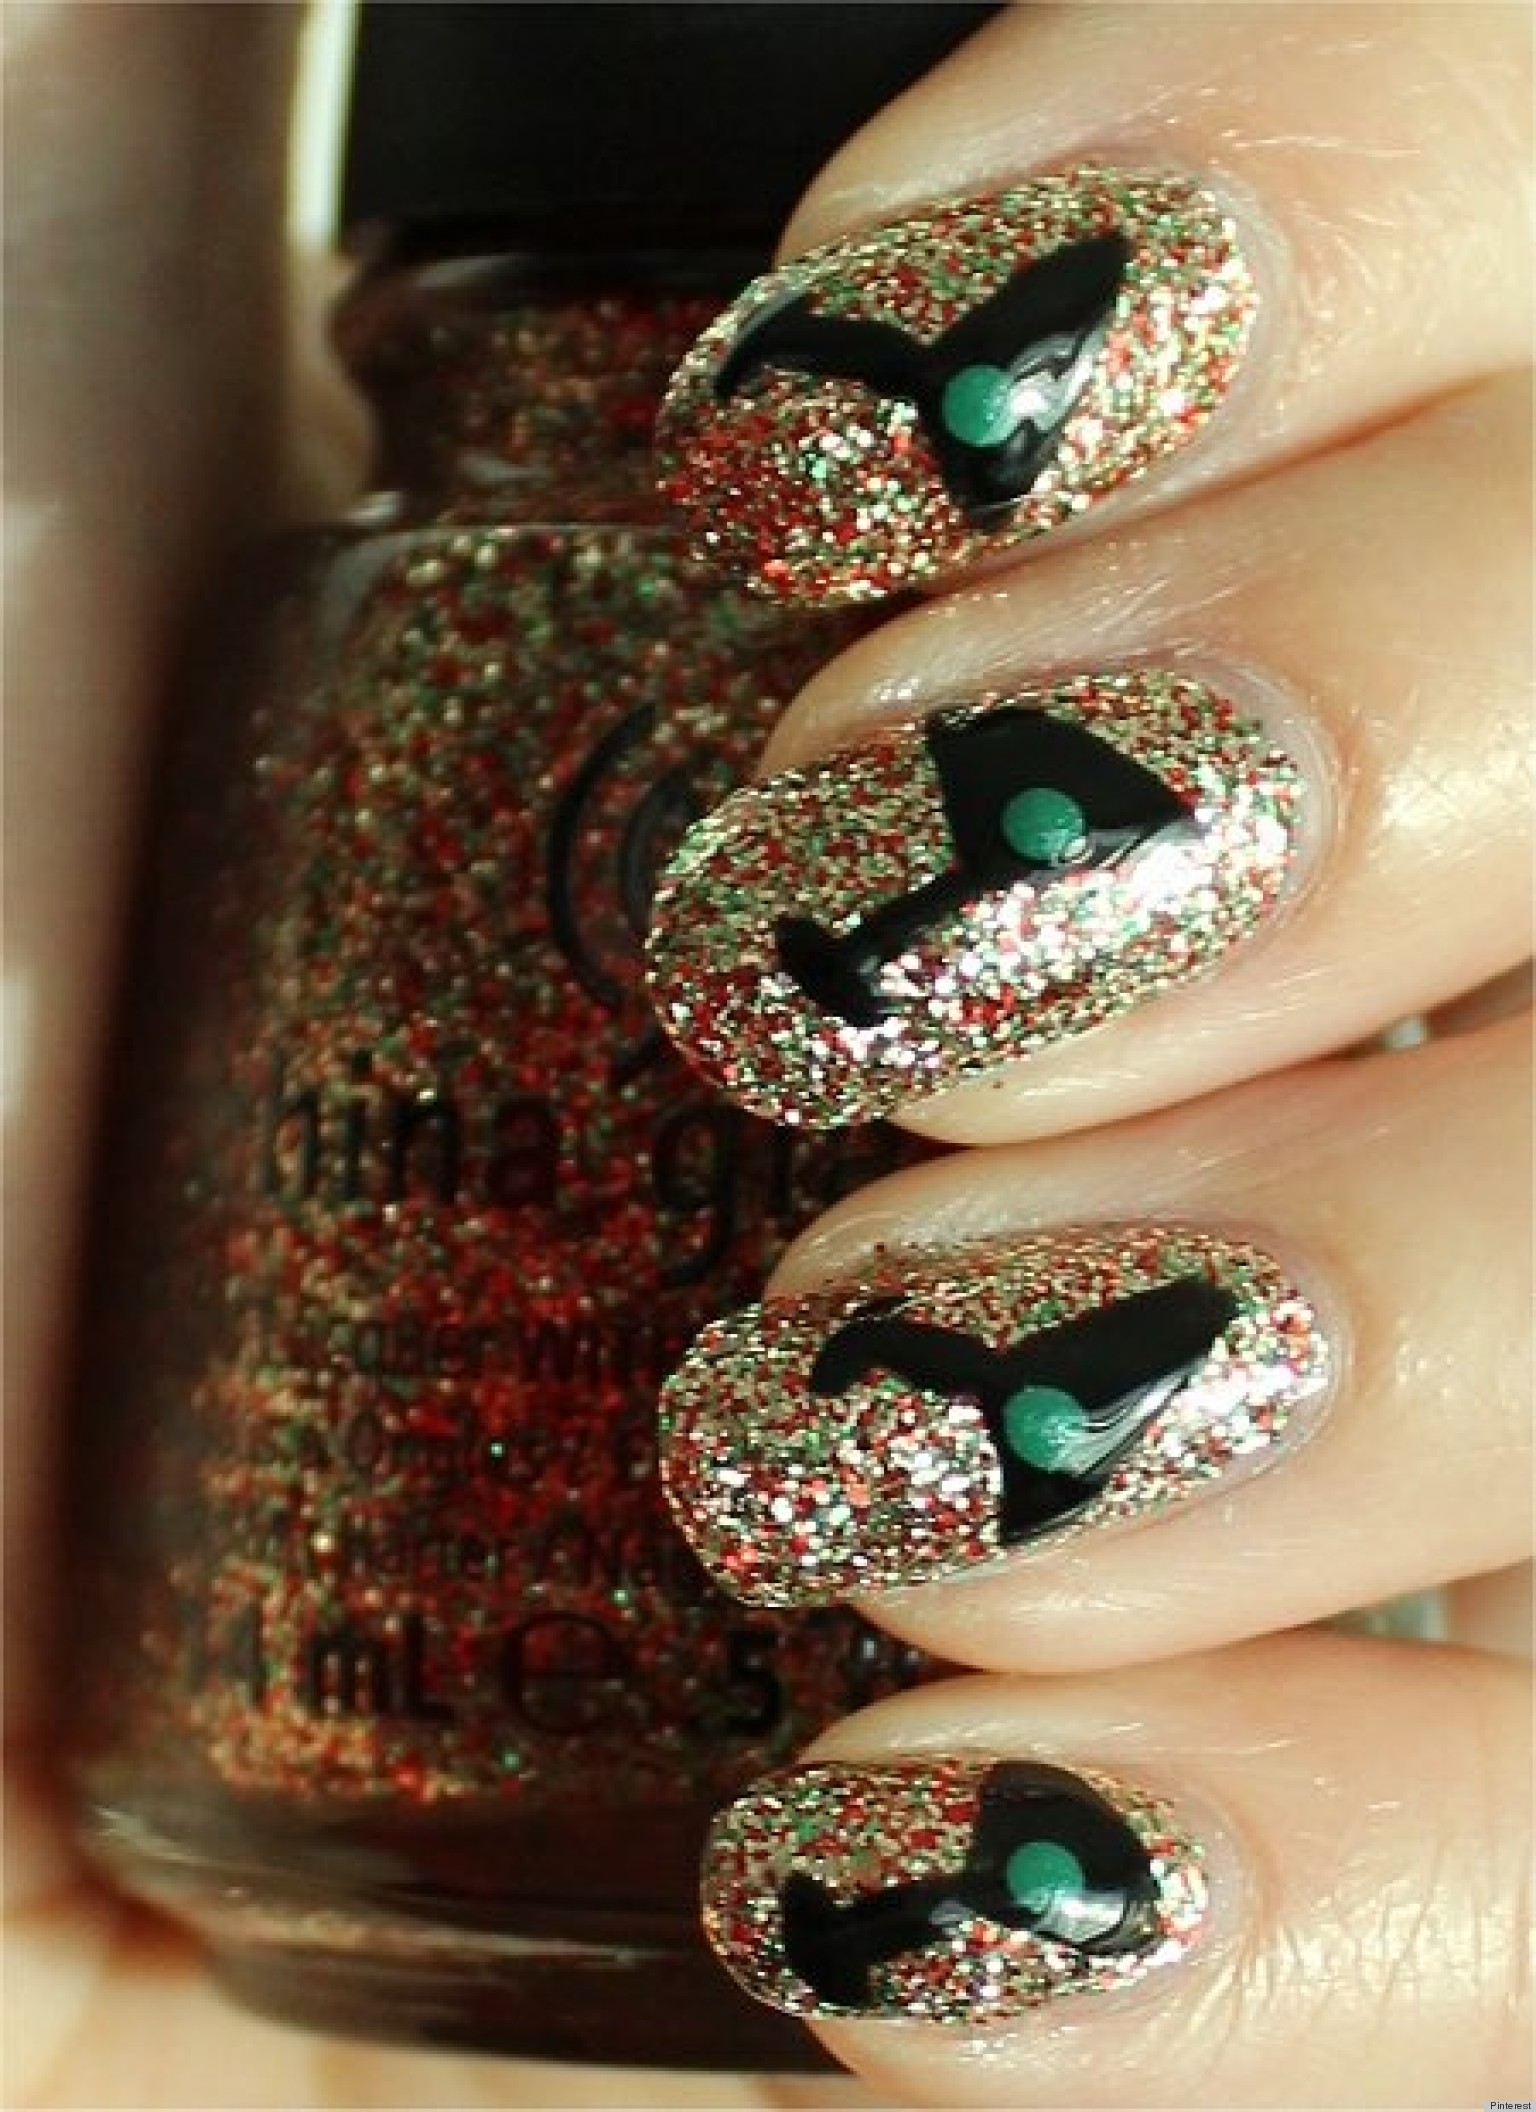 New Year's Eve Nail Art Ideas From Pinterest (PHOTOS) | HuffPost